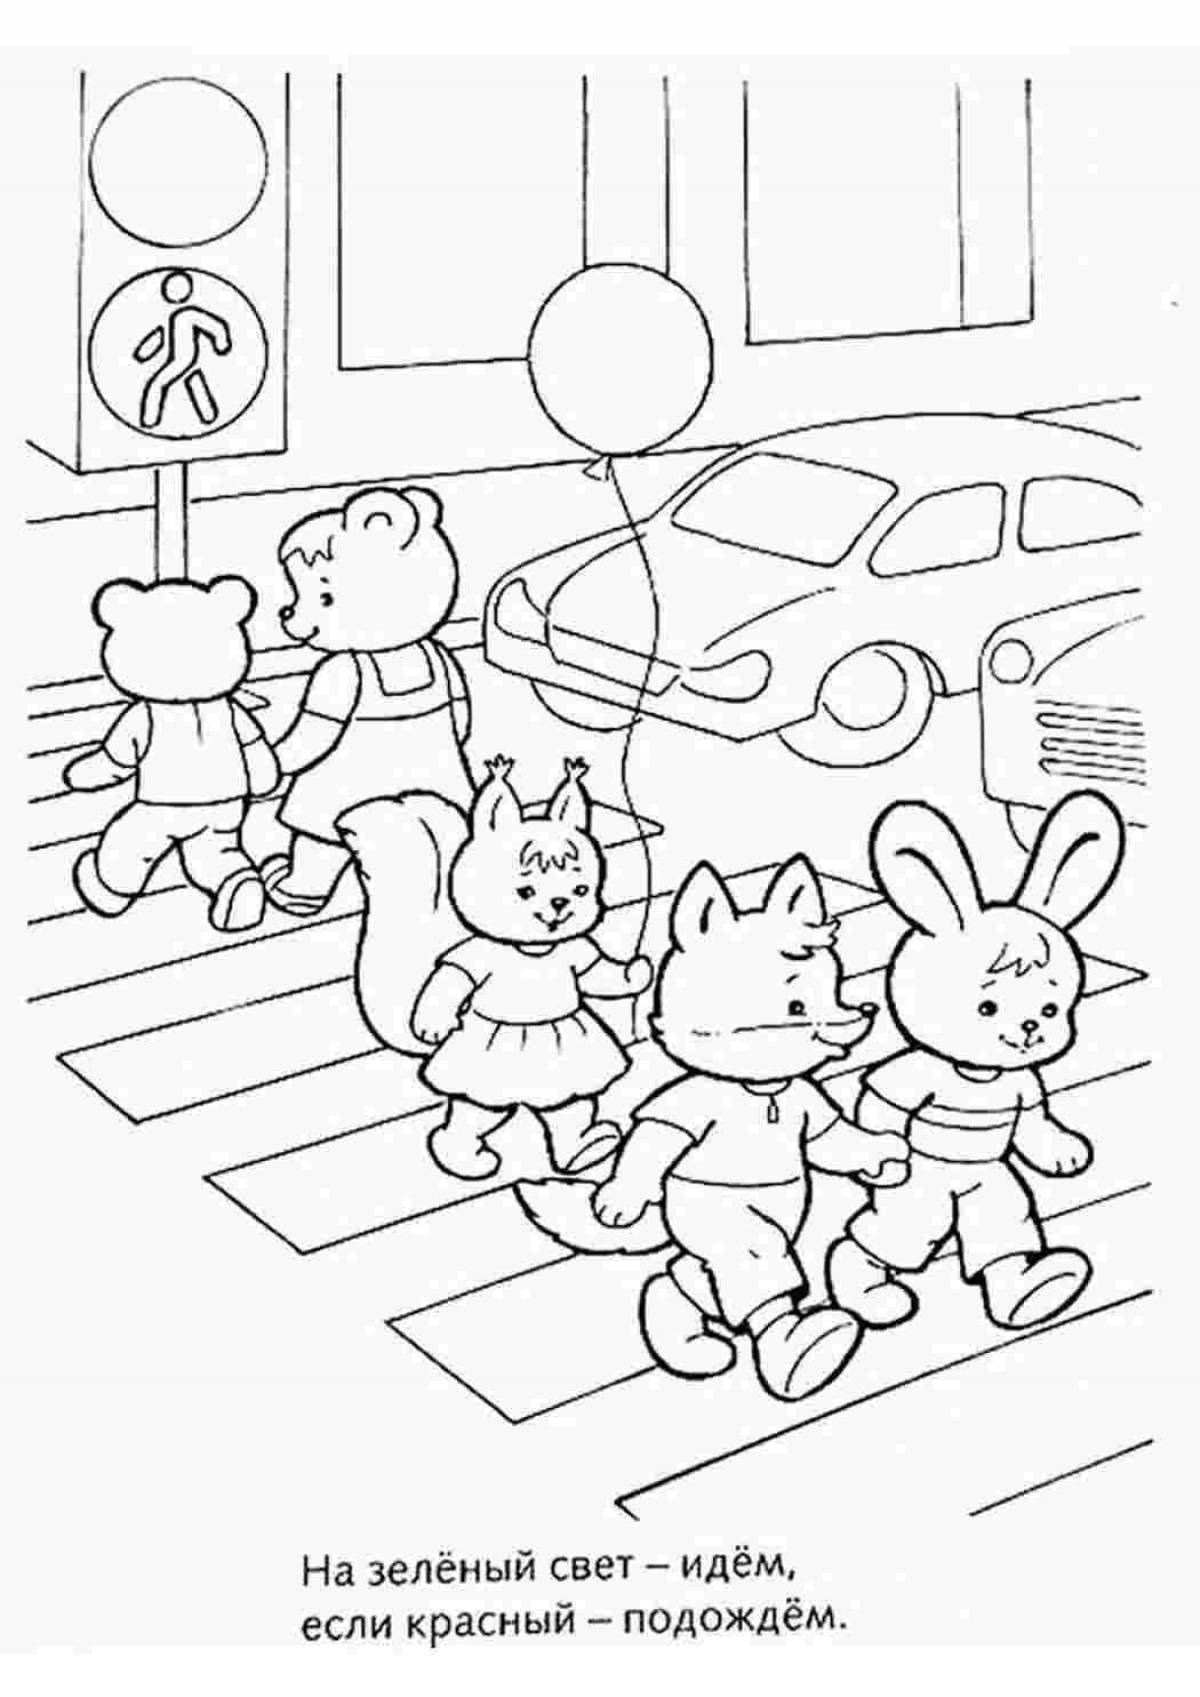 Detailed coloring of traffic rules in kindergarten